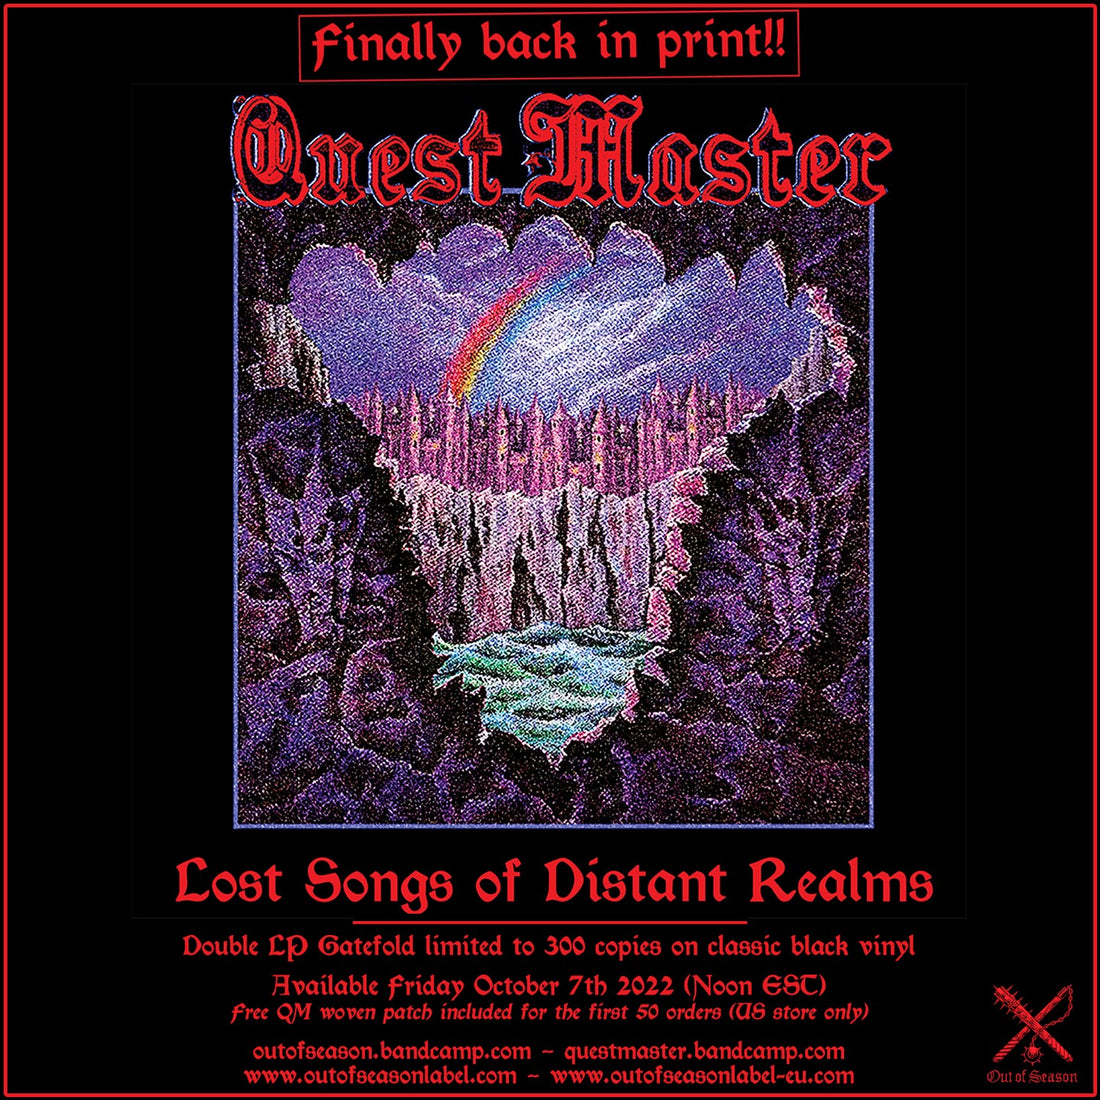 QUEST MASTER VINYL ANNOUNCEMENT! Finally back in print!!